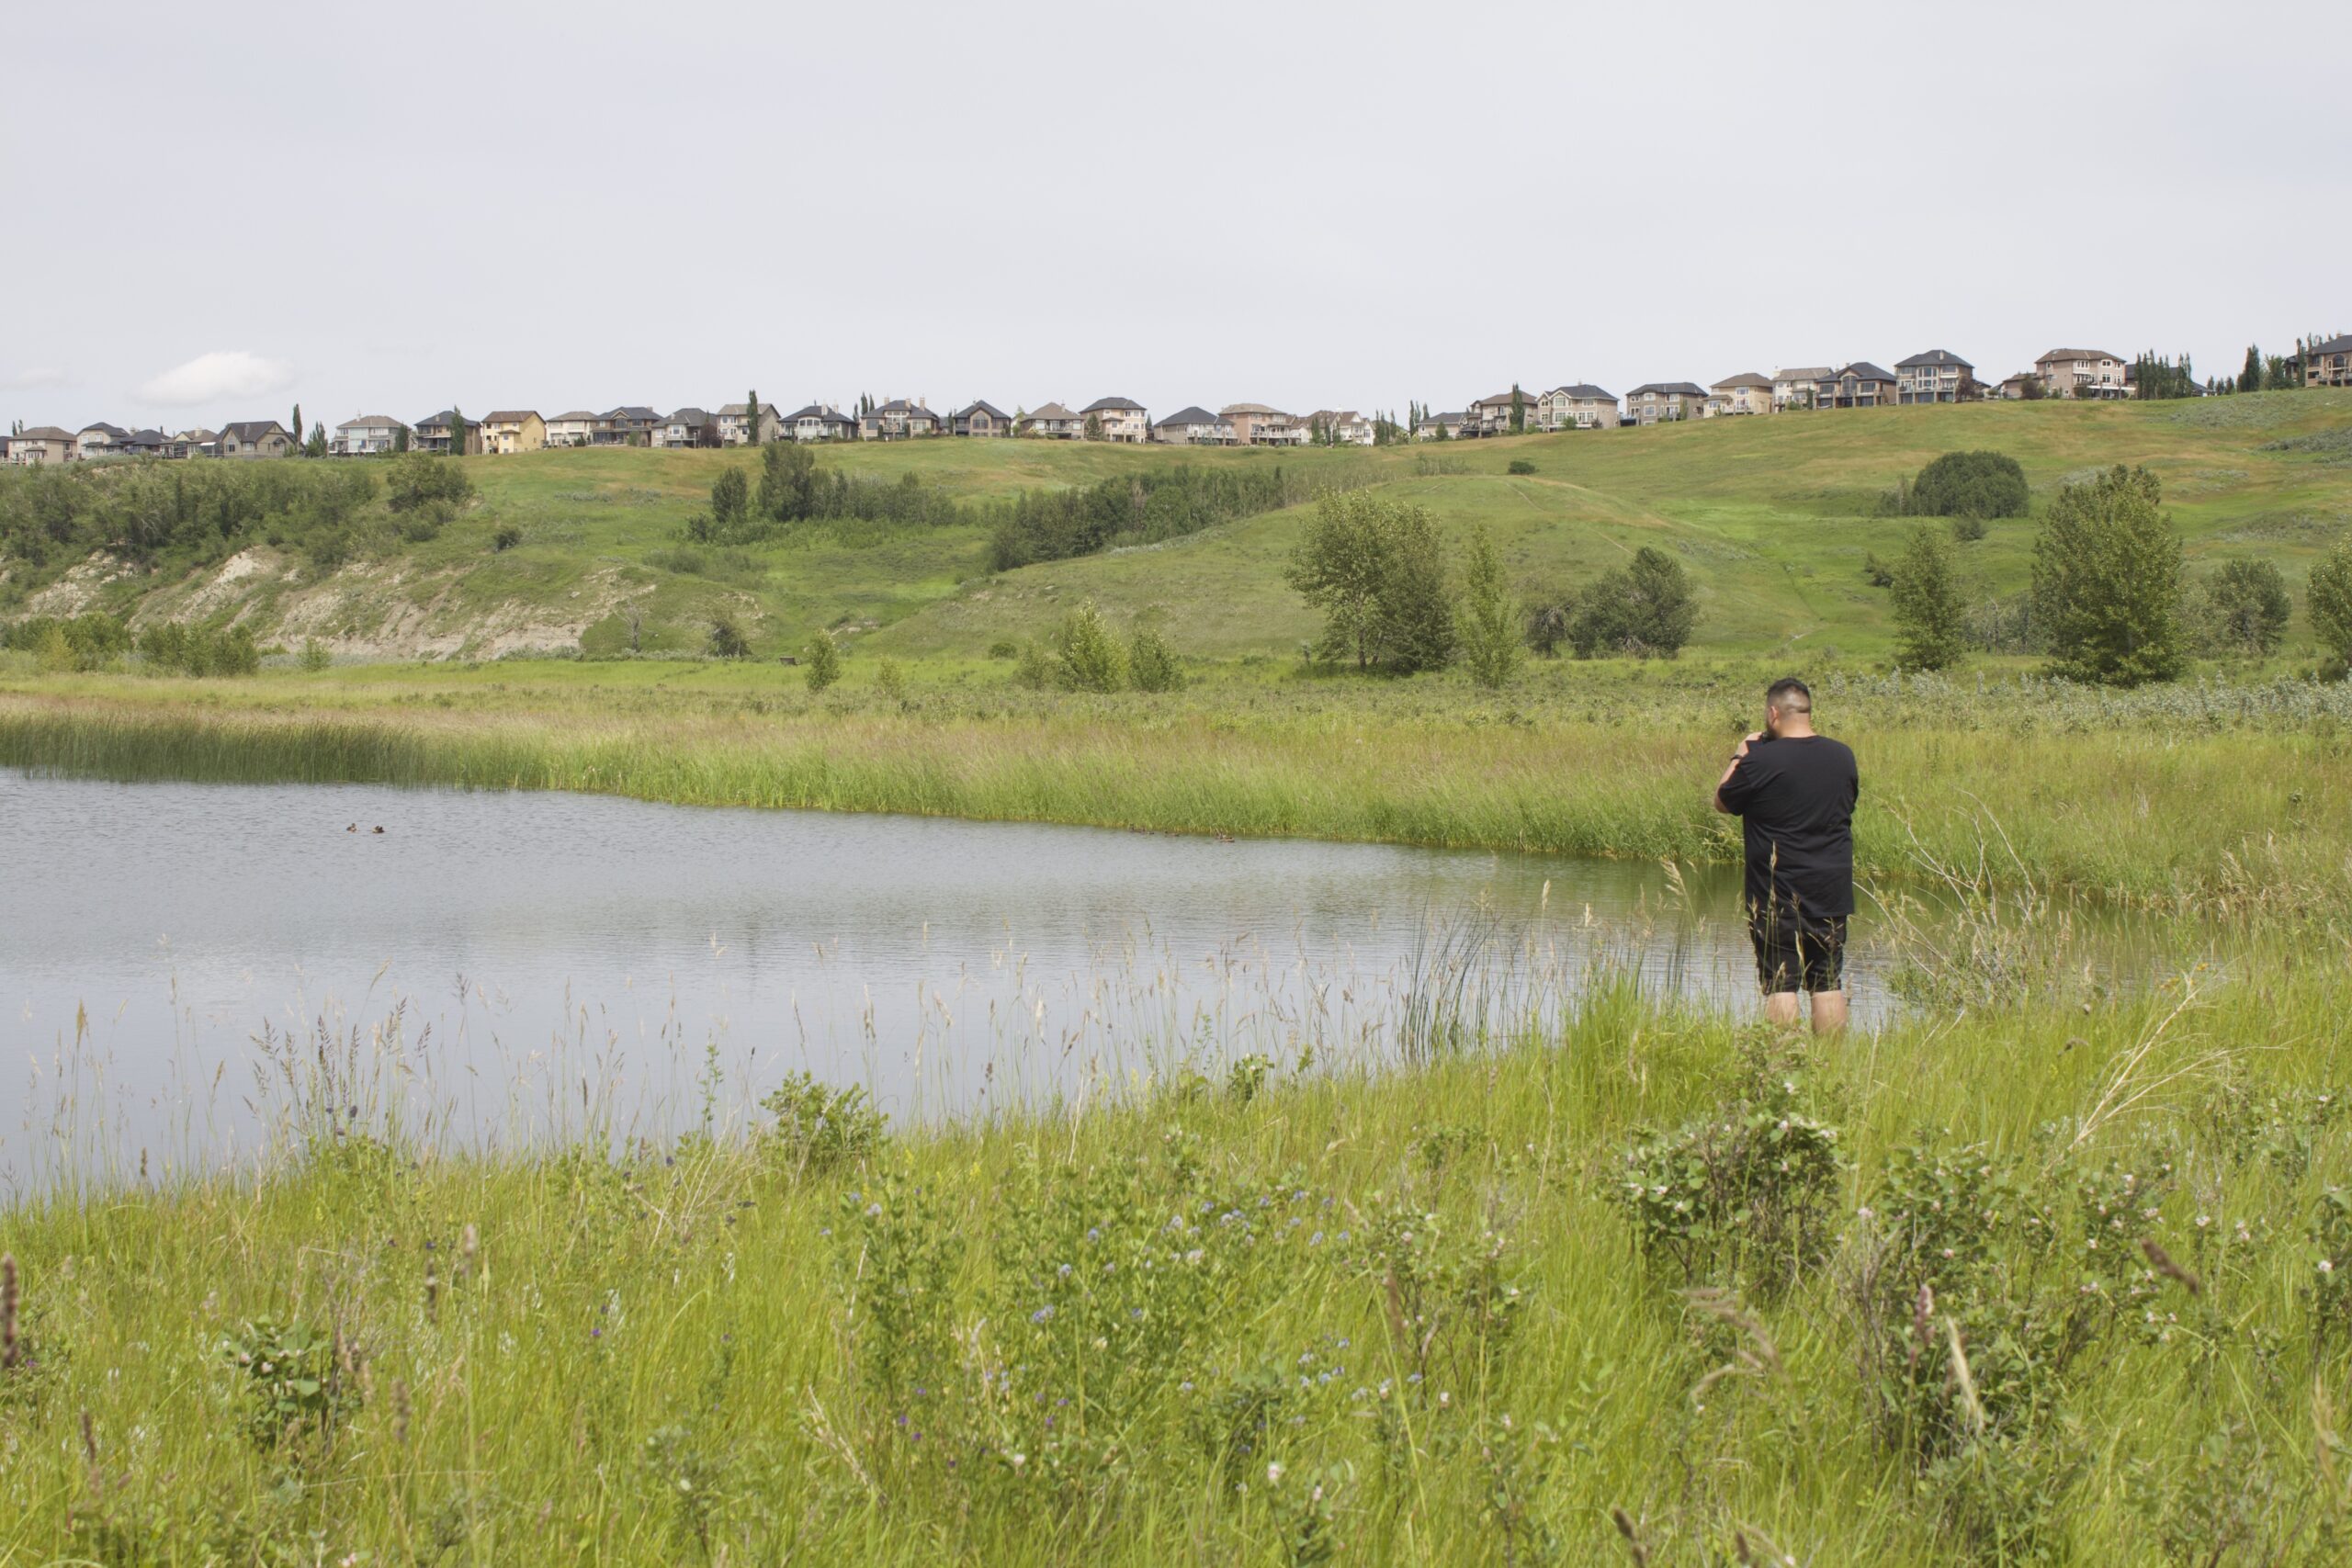 A person stands in a grassy area near a body of water in Wolf Willow.